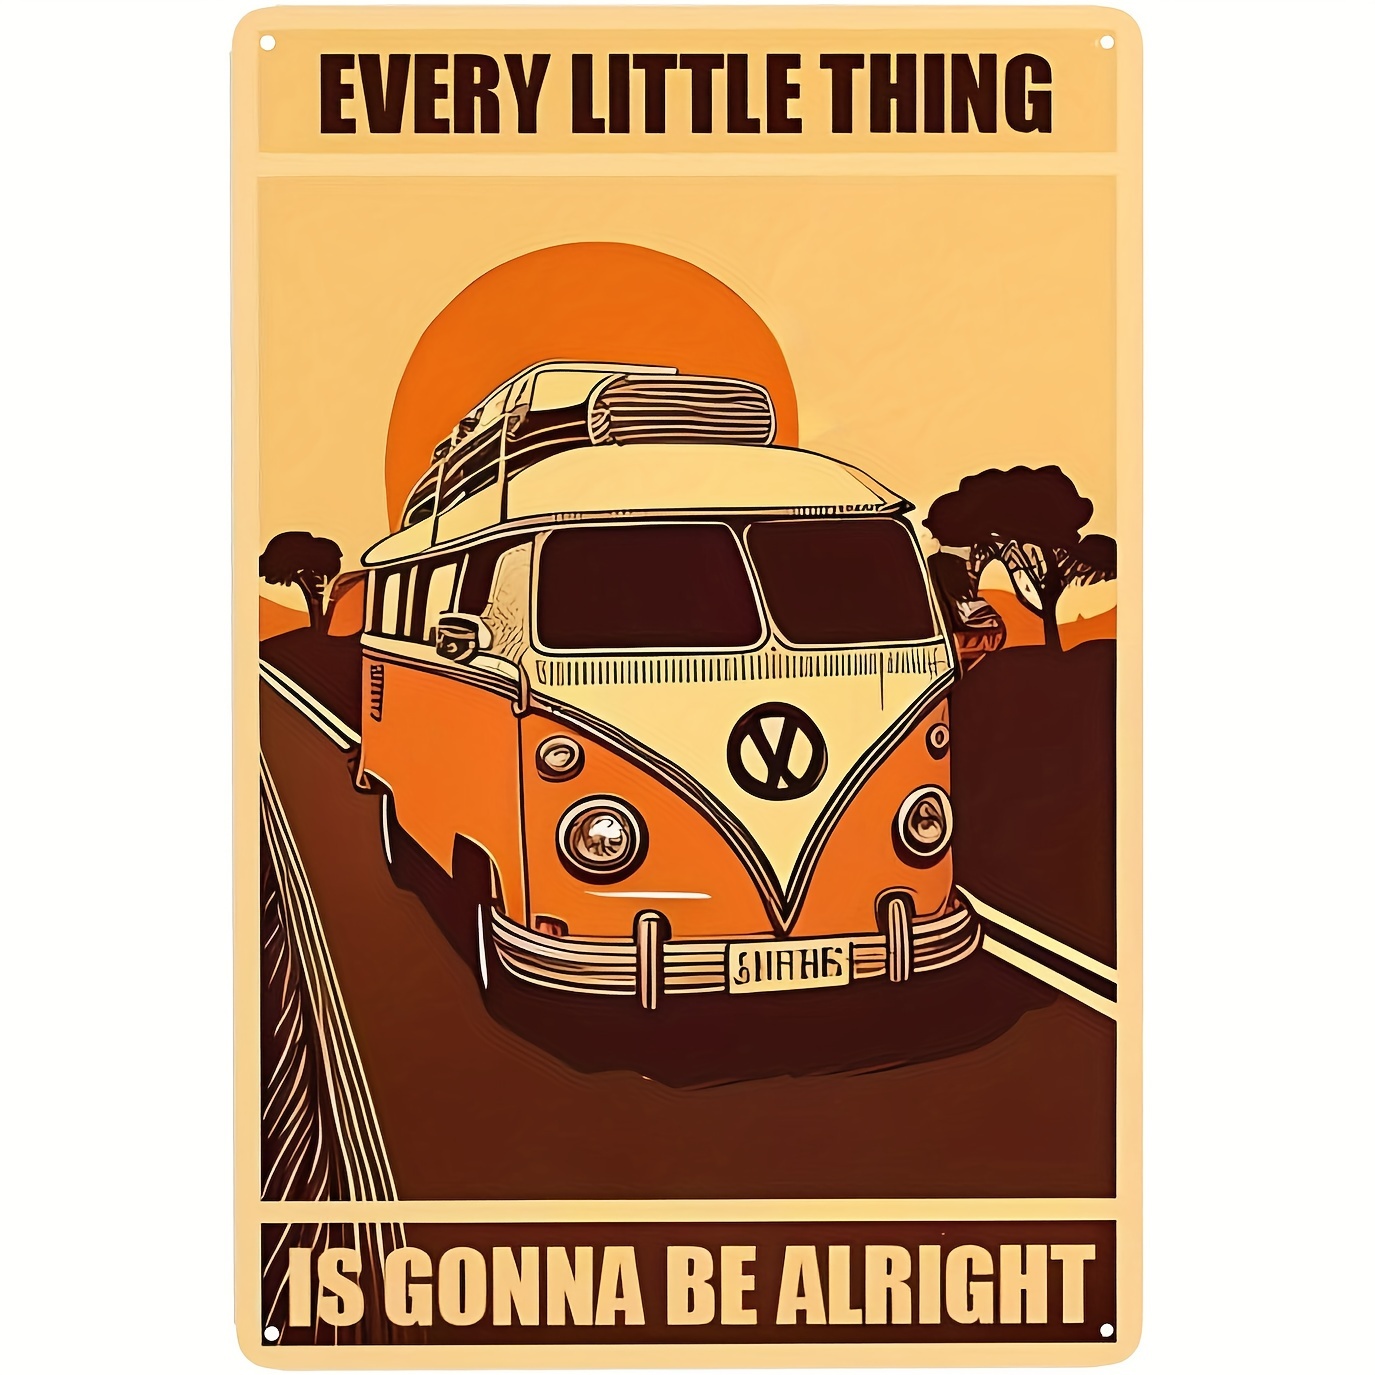 

1pc Vintage Hippie Vw Van Metal Tin Sign, "every Little Thing Is Gonna Be Alright" Quote Wall Art, Retro Decor For Office, Shop, Bar, Bedroom, Diner, Patio, Garage, 8x12 Inches